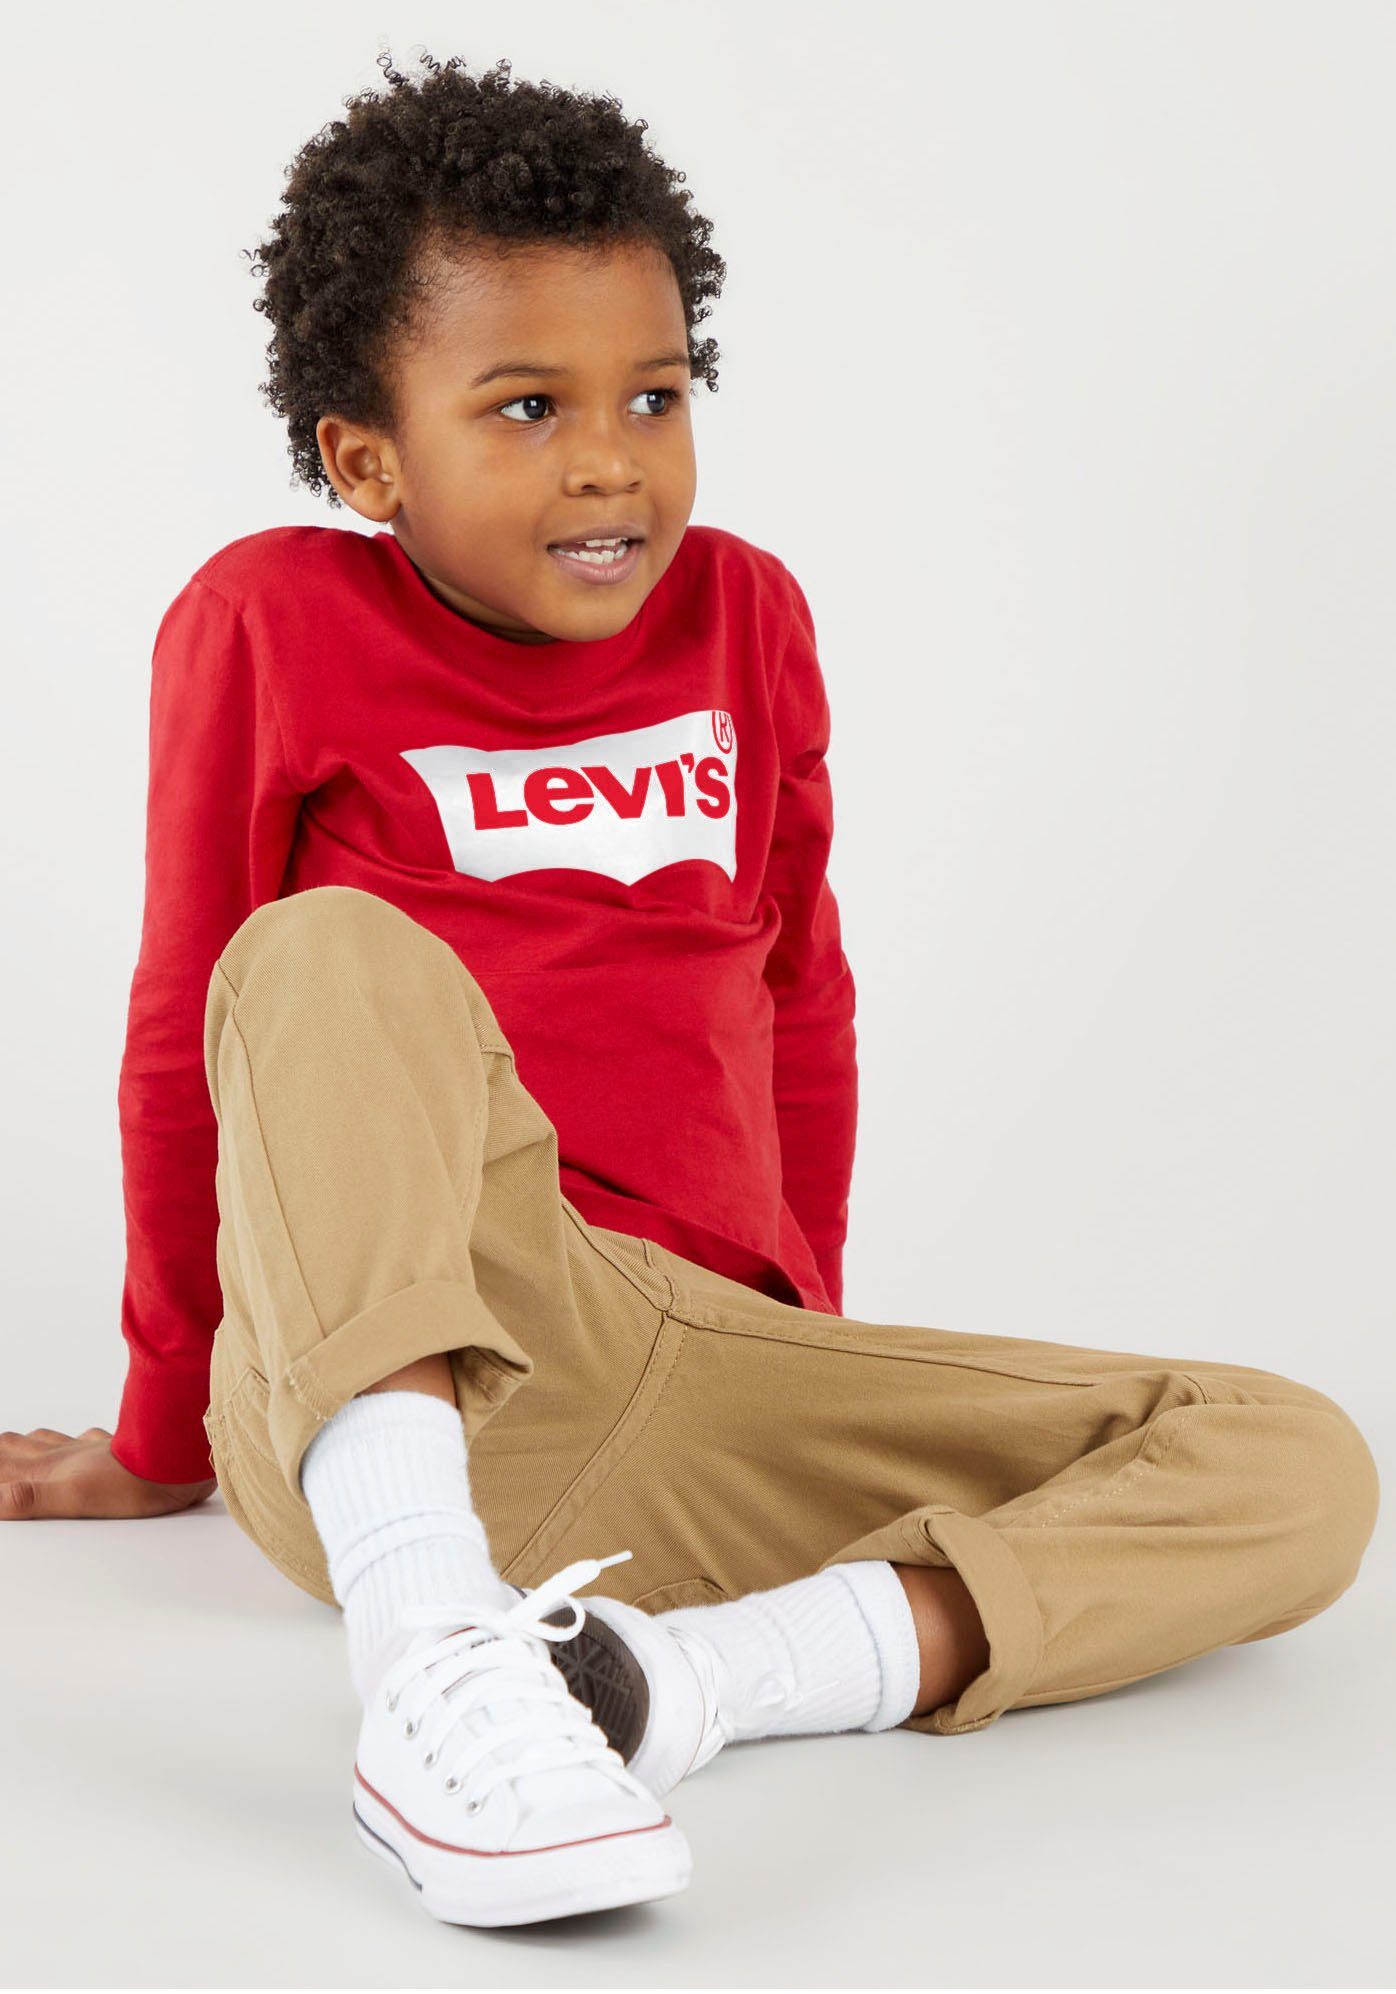 Levi's® Kids Langarmshirt L/S BATWING BOYS red for TEE